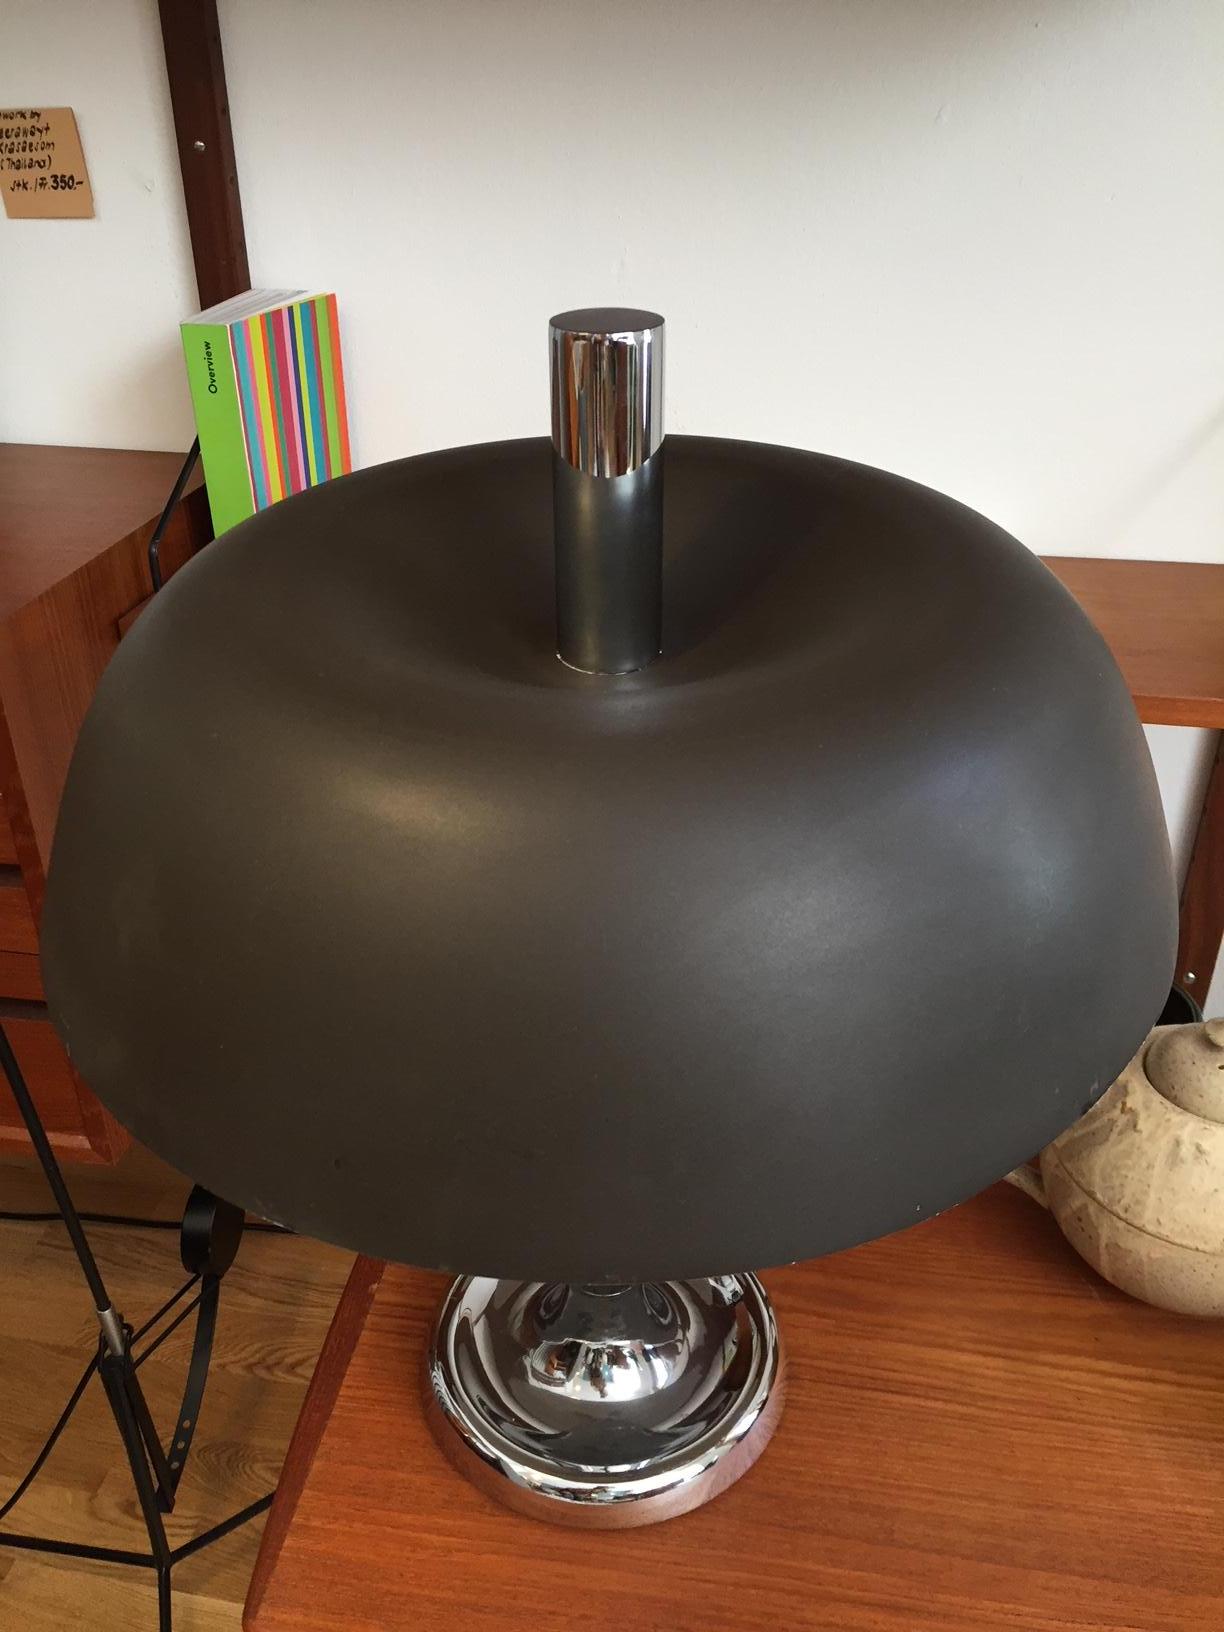 Midcentury mushroom table lamp was designed by Egon Hillebrand and produced by Hillebrand Lighting during the 1960s. The lamp features the distinctive characteristics of the Atomic Age. The black canopy shade, made of metal, is set on a chromed